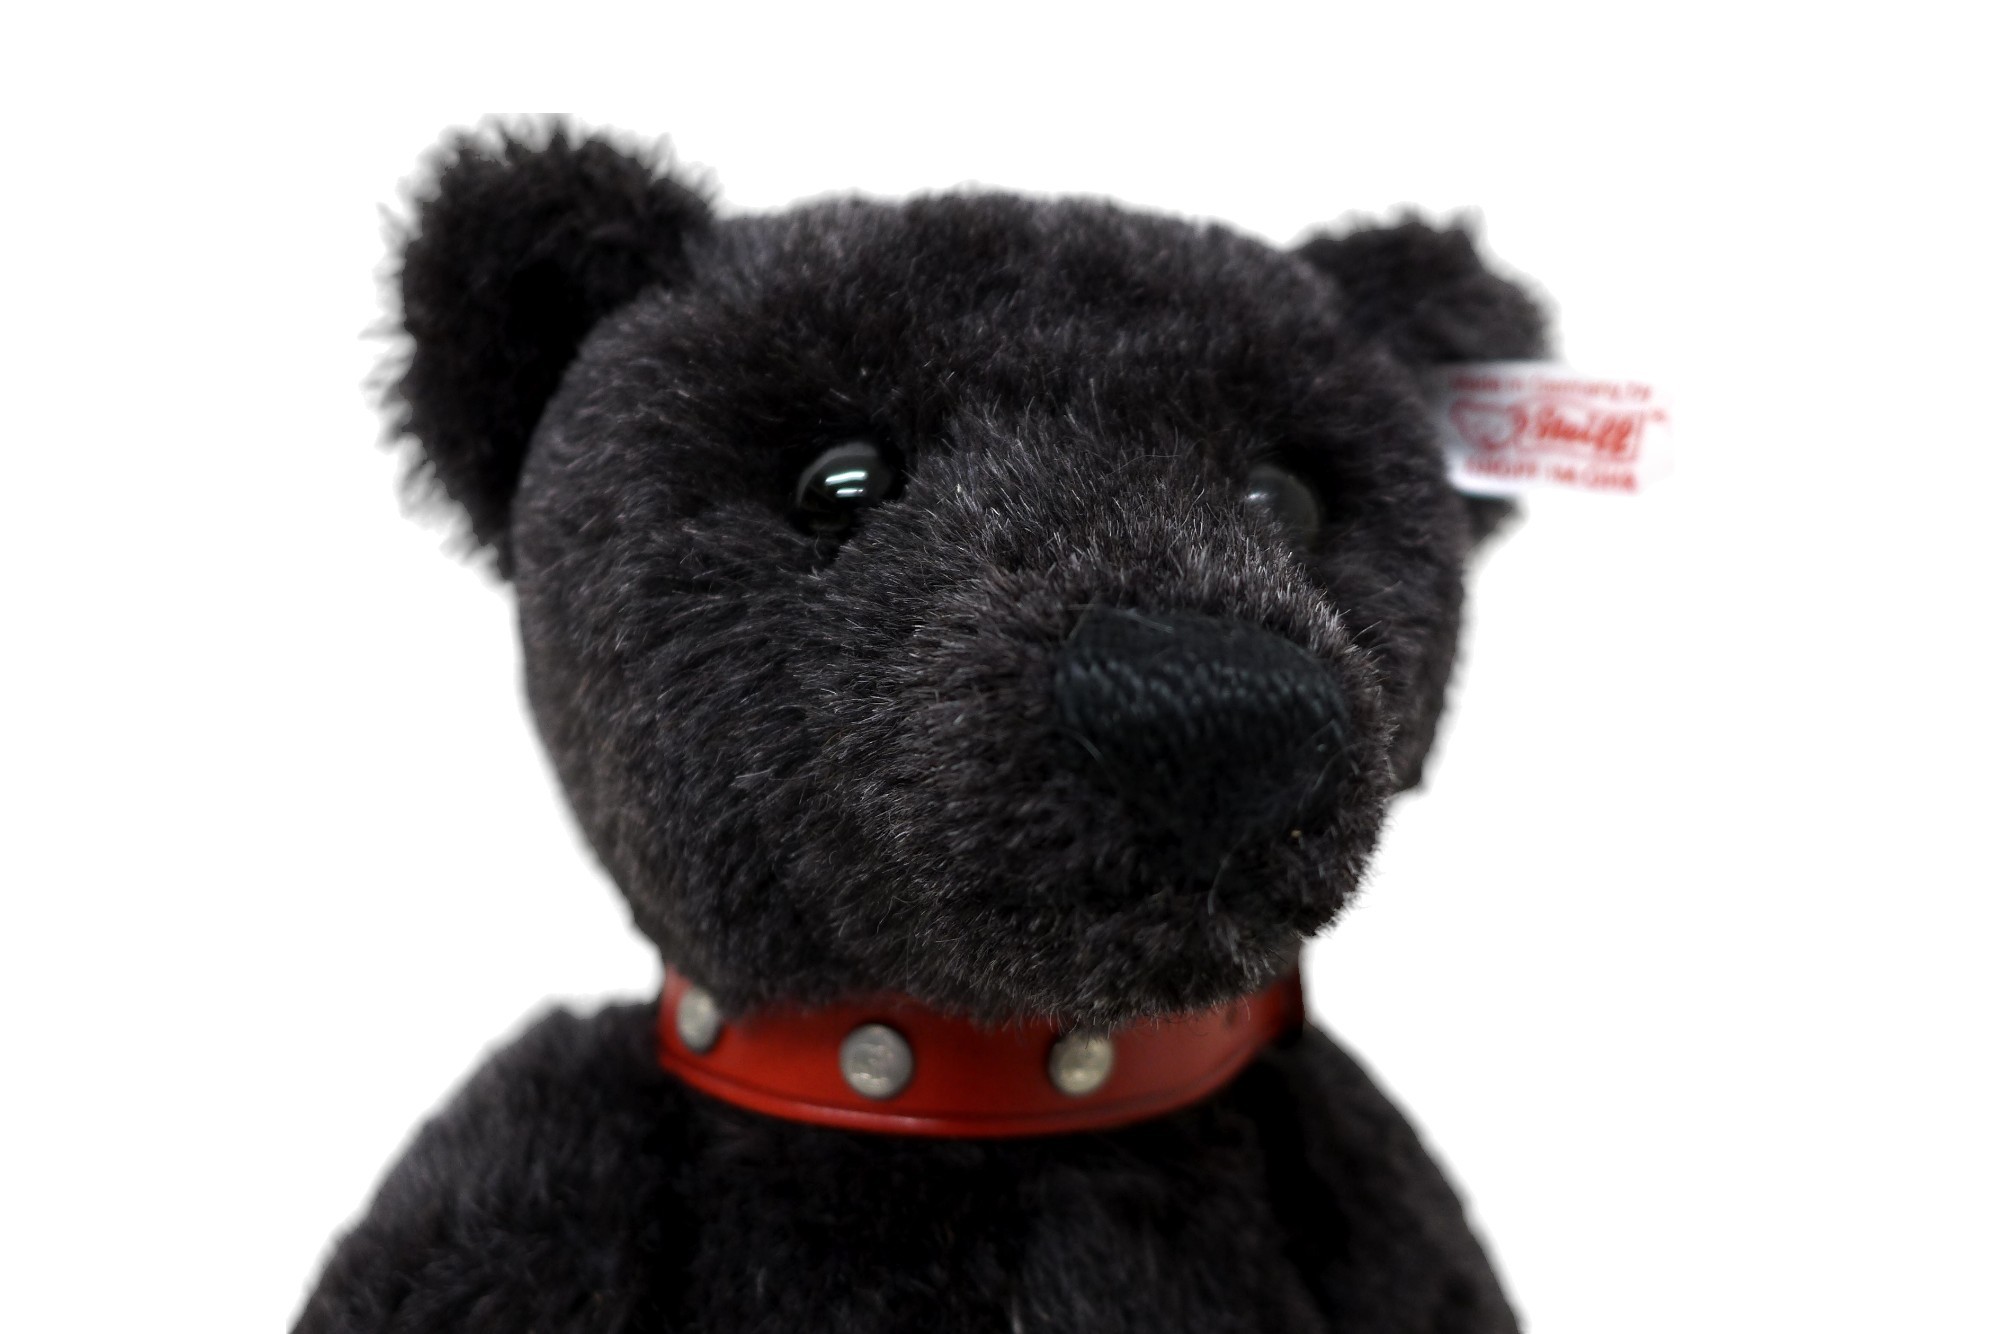 Steiff Teddy Bear Black Bear with red studded collar, Black mohair, poseable five jointed bear, - Image 8 of 13